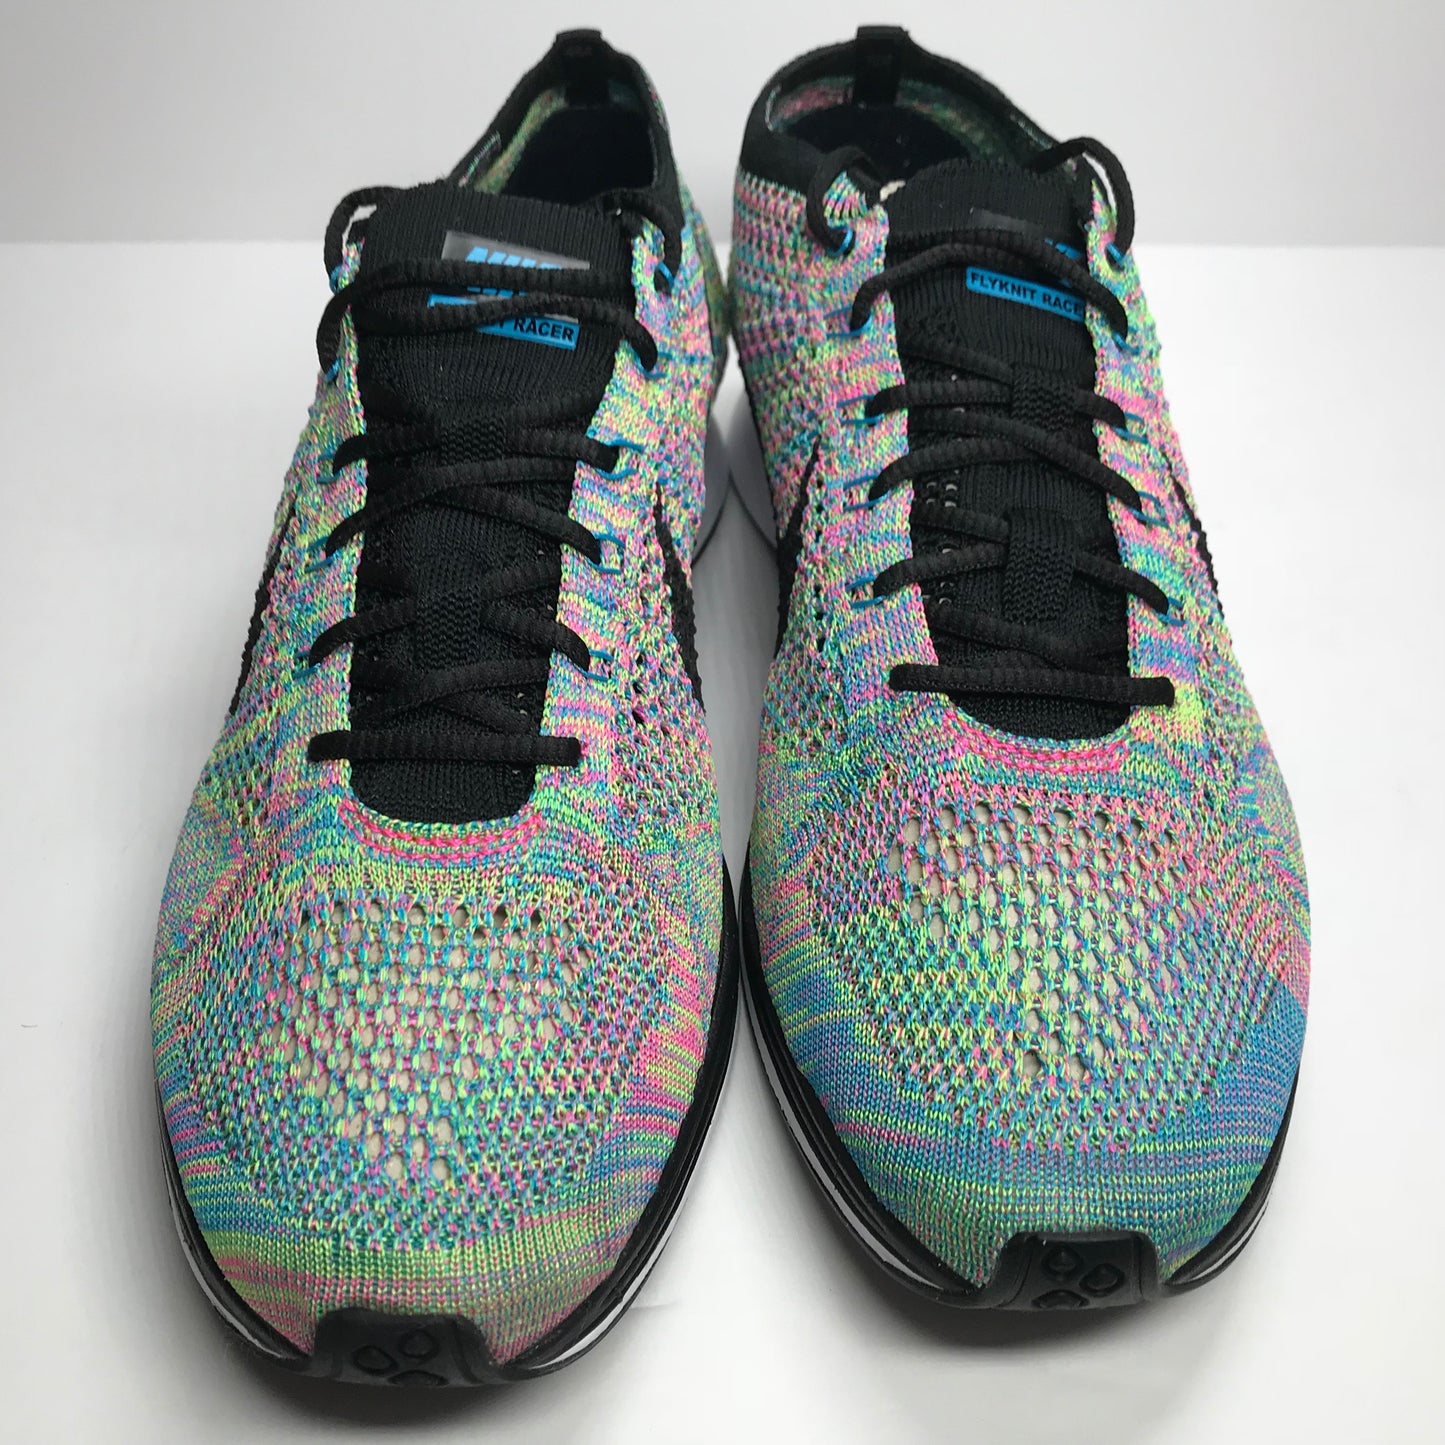 DS Nike Flyknit Racer Multicolore 526628 304 Homme Taille 9.5